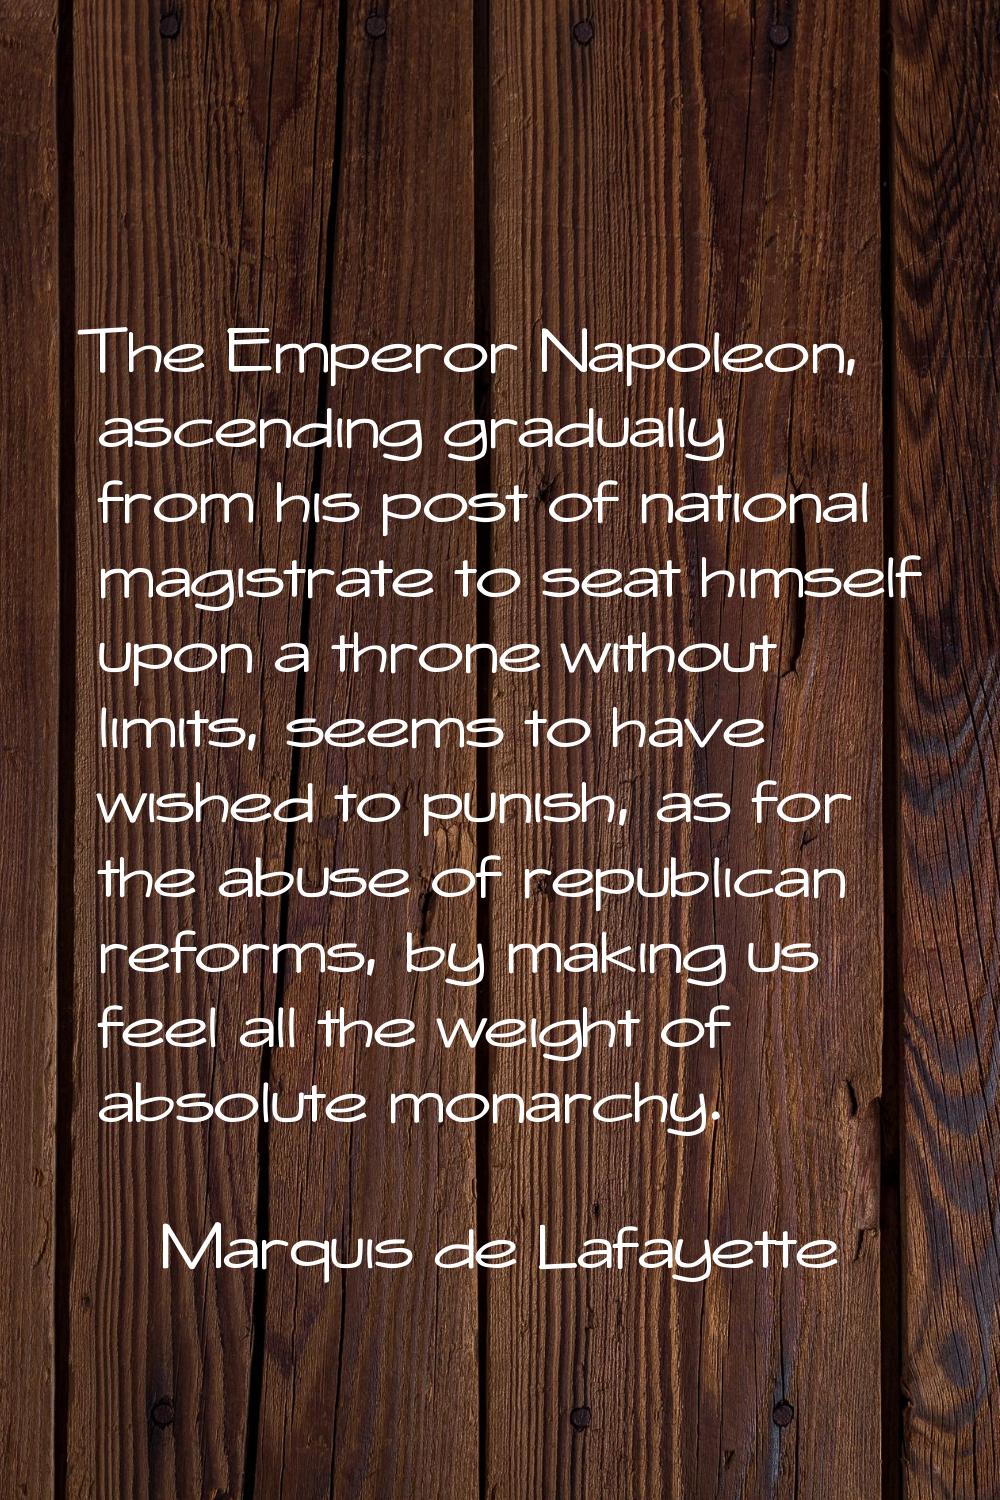 The Emperor Napoleon, ascending gradually from his post of national magistrate to seat himself upon